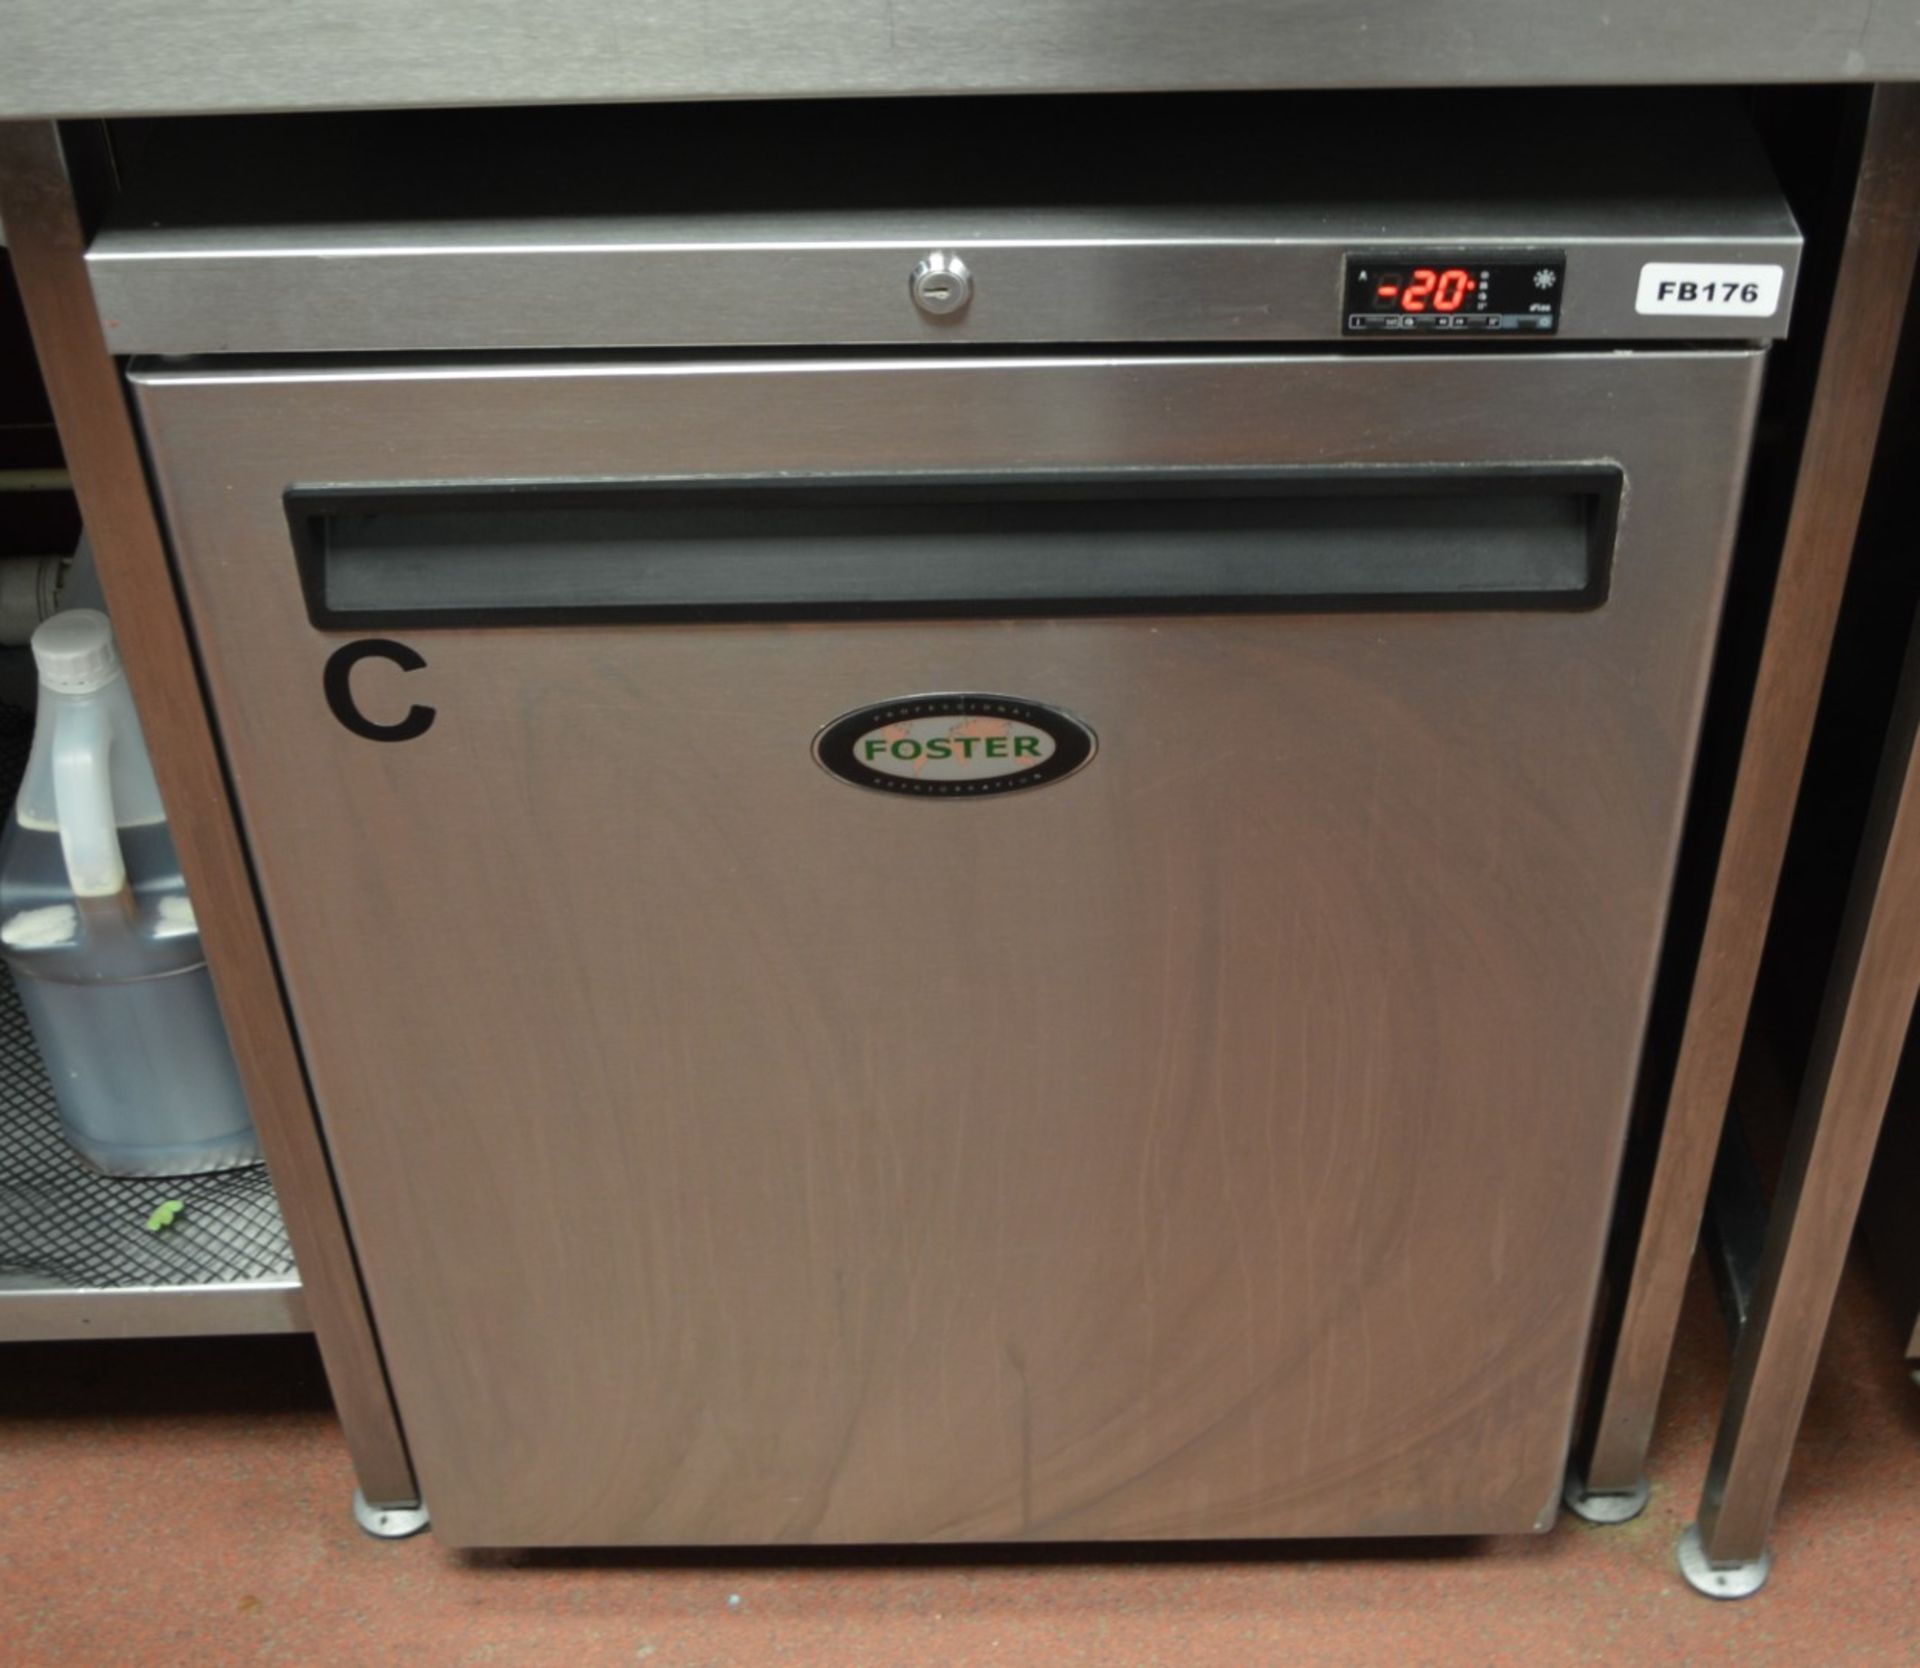 1 x Foster Undercounter Single Door Freezer With Stainless Steel Finish - Model LR150-A - H65 x - Image 4 of 4